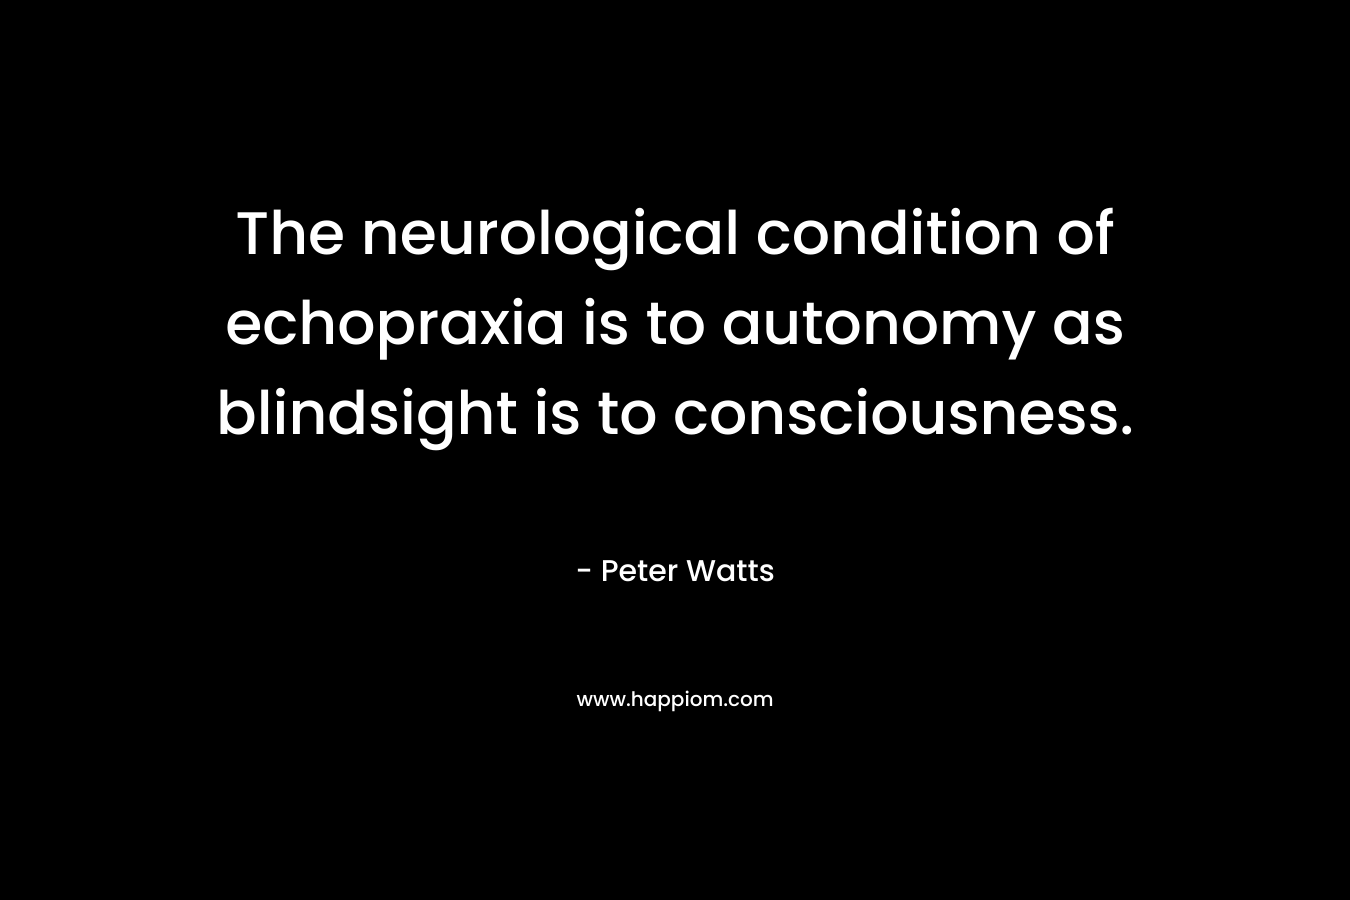 The neurological condition of echopraxia is to autonomy as blindsight is to consciousness. – Peter Watts